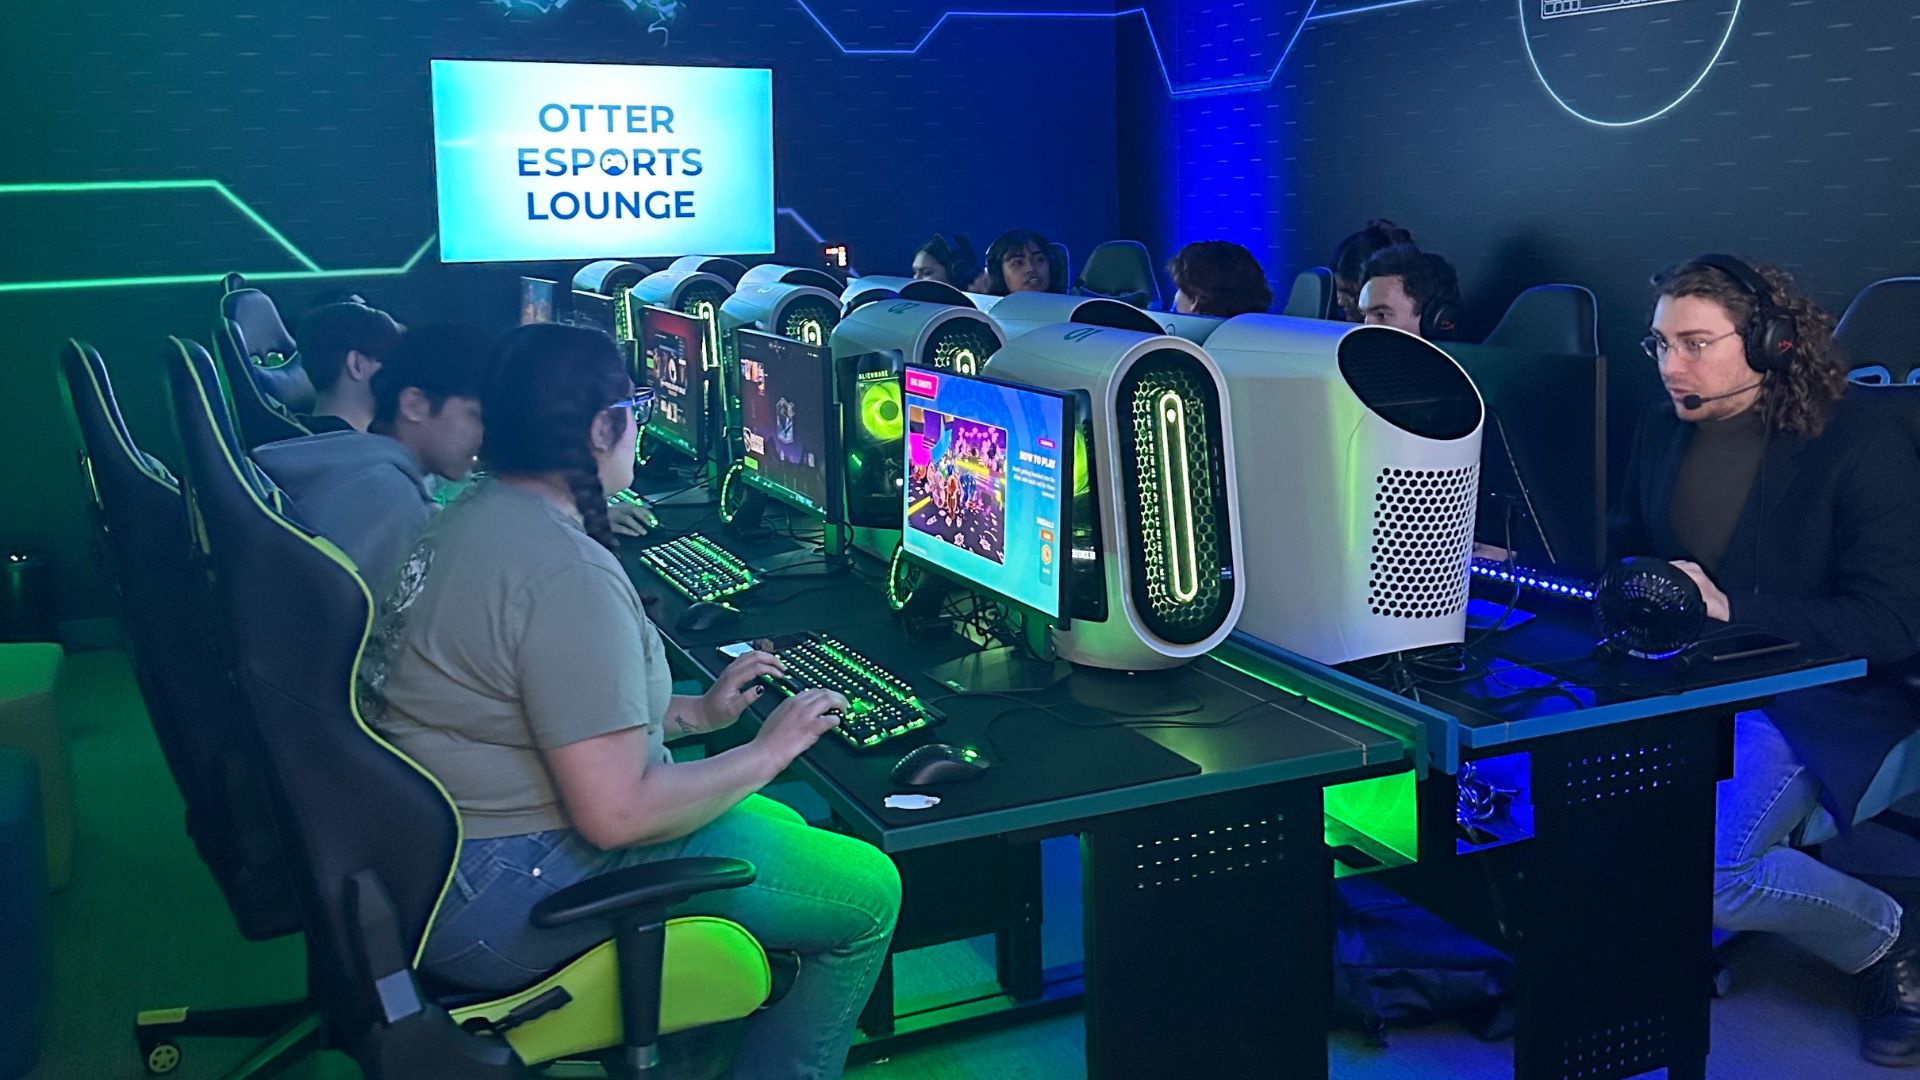 Students enjoying the newly opened Otter Esports Lounge by playing on the 10 video gaming stations